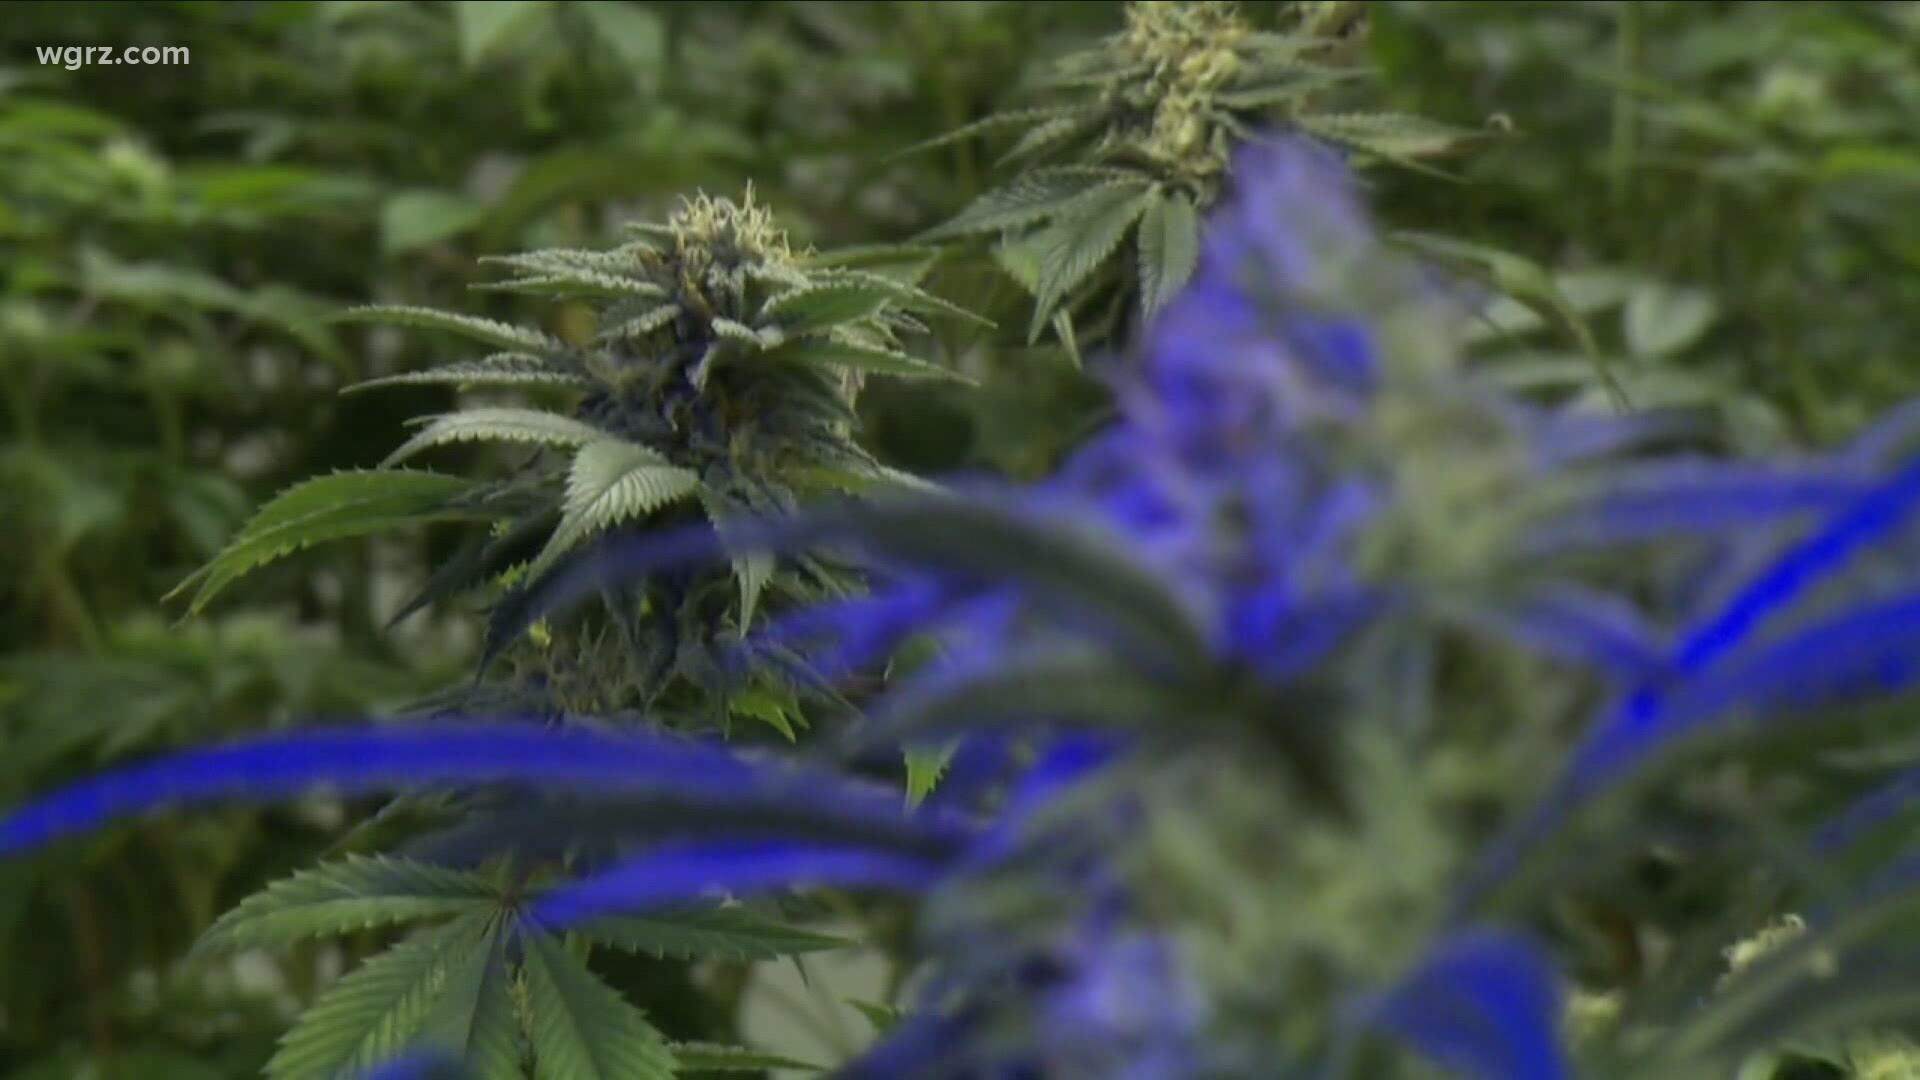 CEO of a company called Zephyr has been trying to bring a massive high-tech cannabis production and distribution campus to South Buffalo